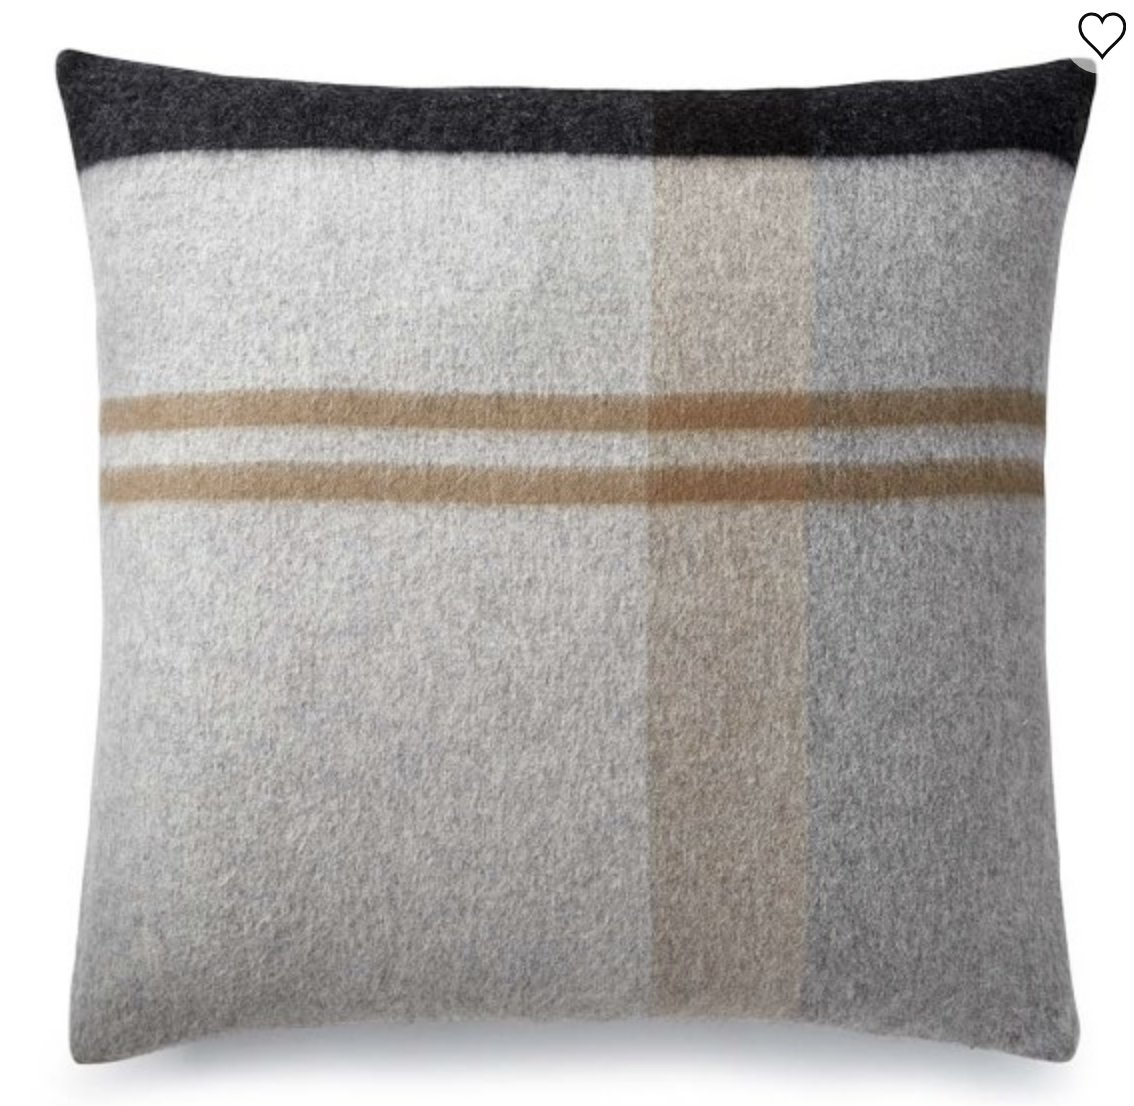 Plaid Lambswool Pillow Cover, Greyson - Image 0